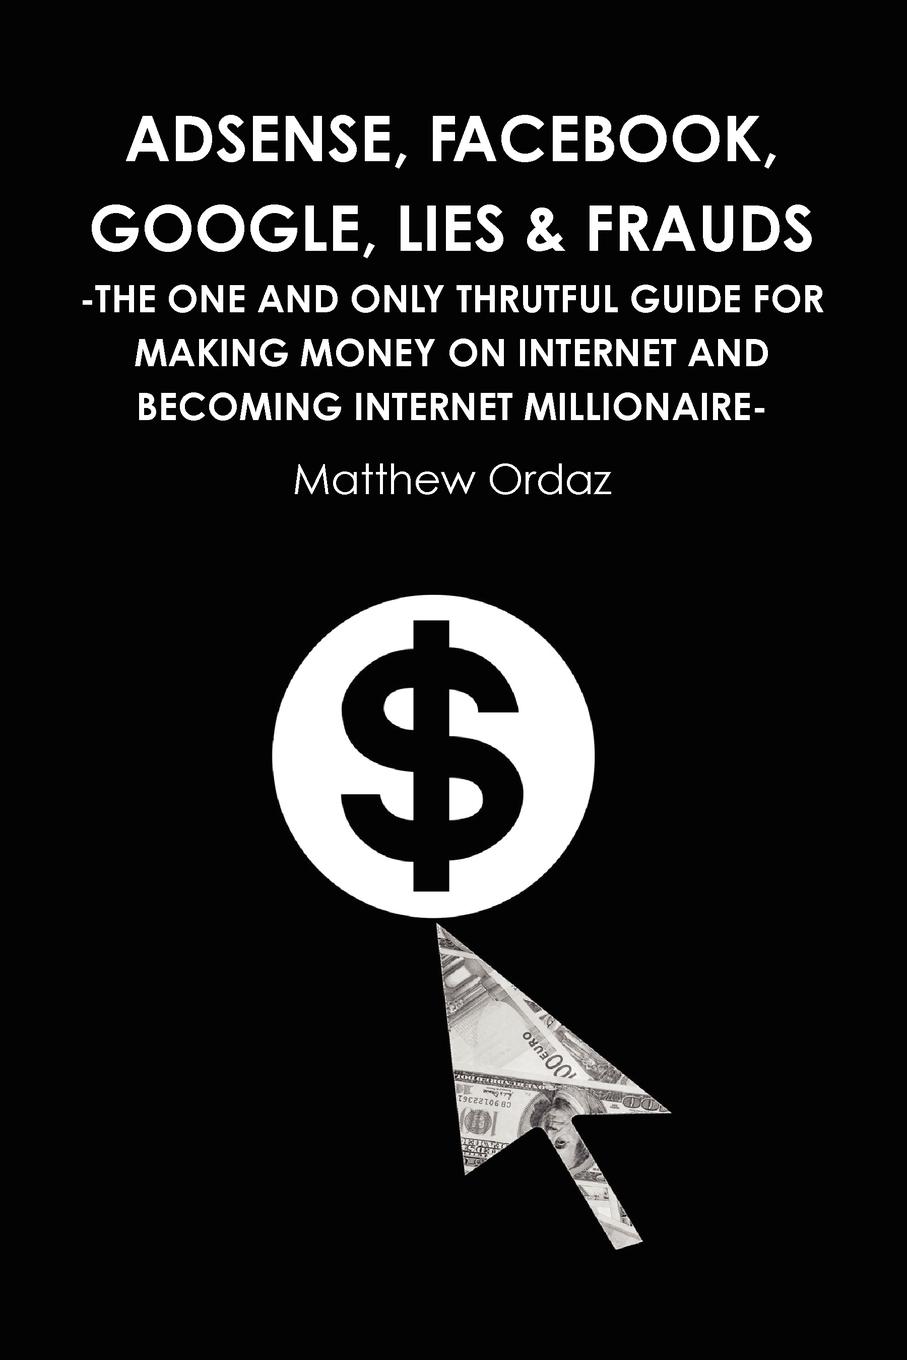 Matthew Ordaz Adsense, Facebook, Google, Lies . Frauds -The one and only truthful guide for making money on internet and becoming Internet millionaire-